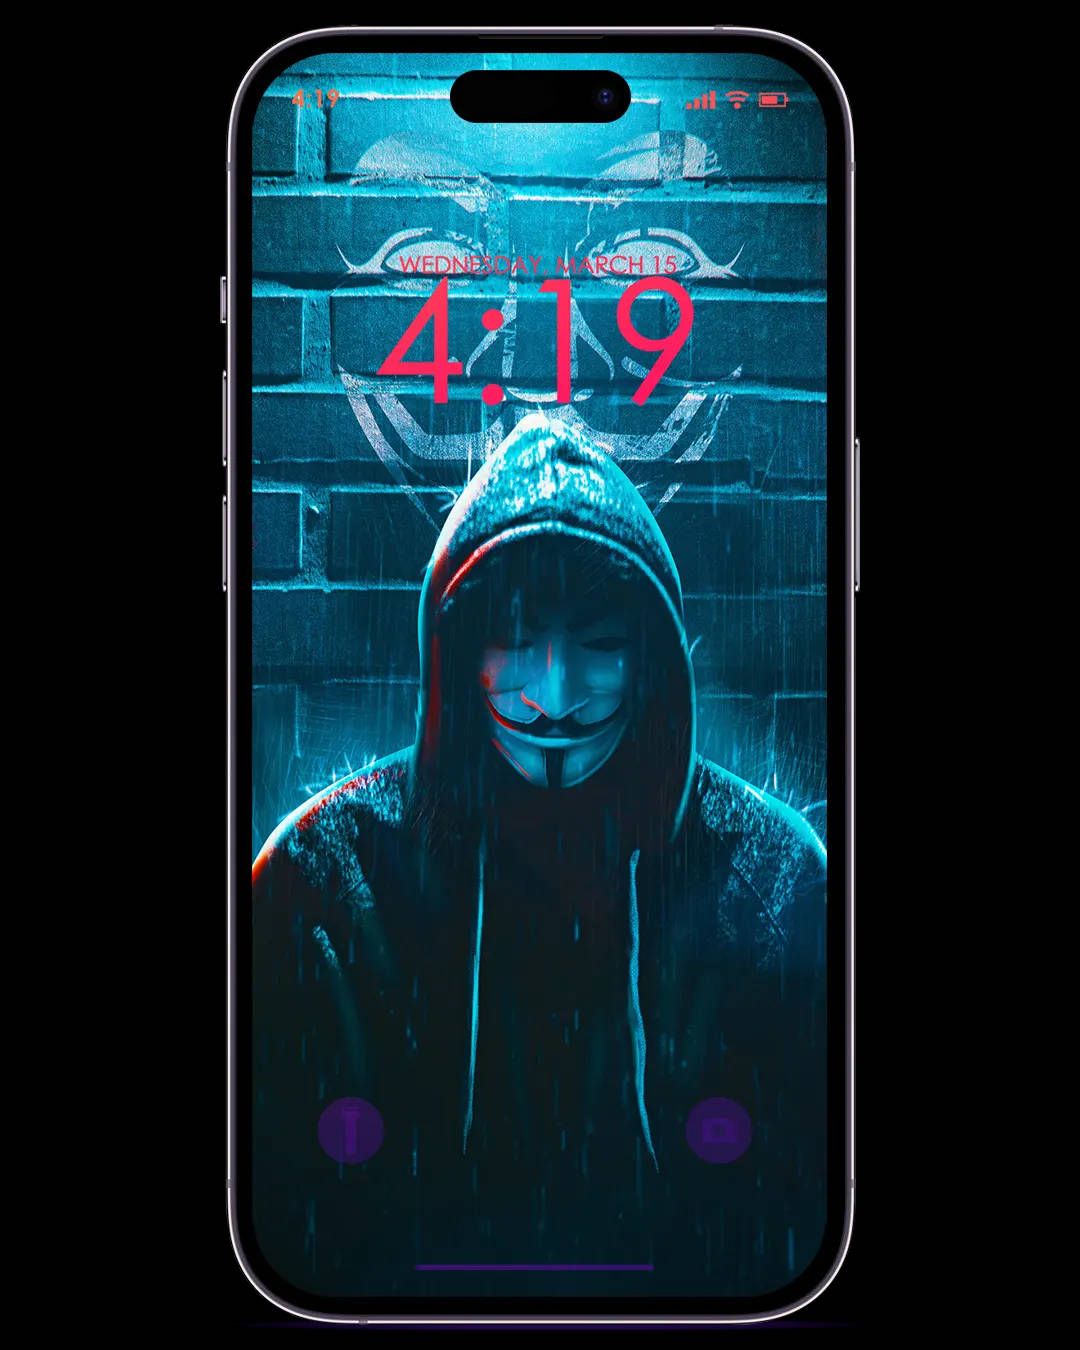 Anonymous Hacker Wednesday Mobile Phone Wallpaper